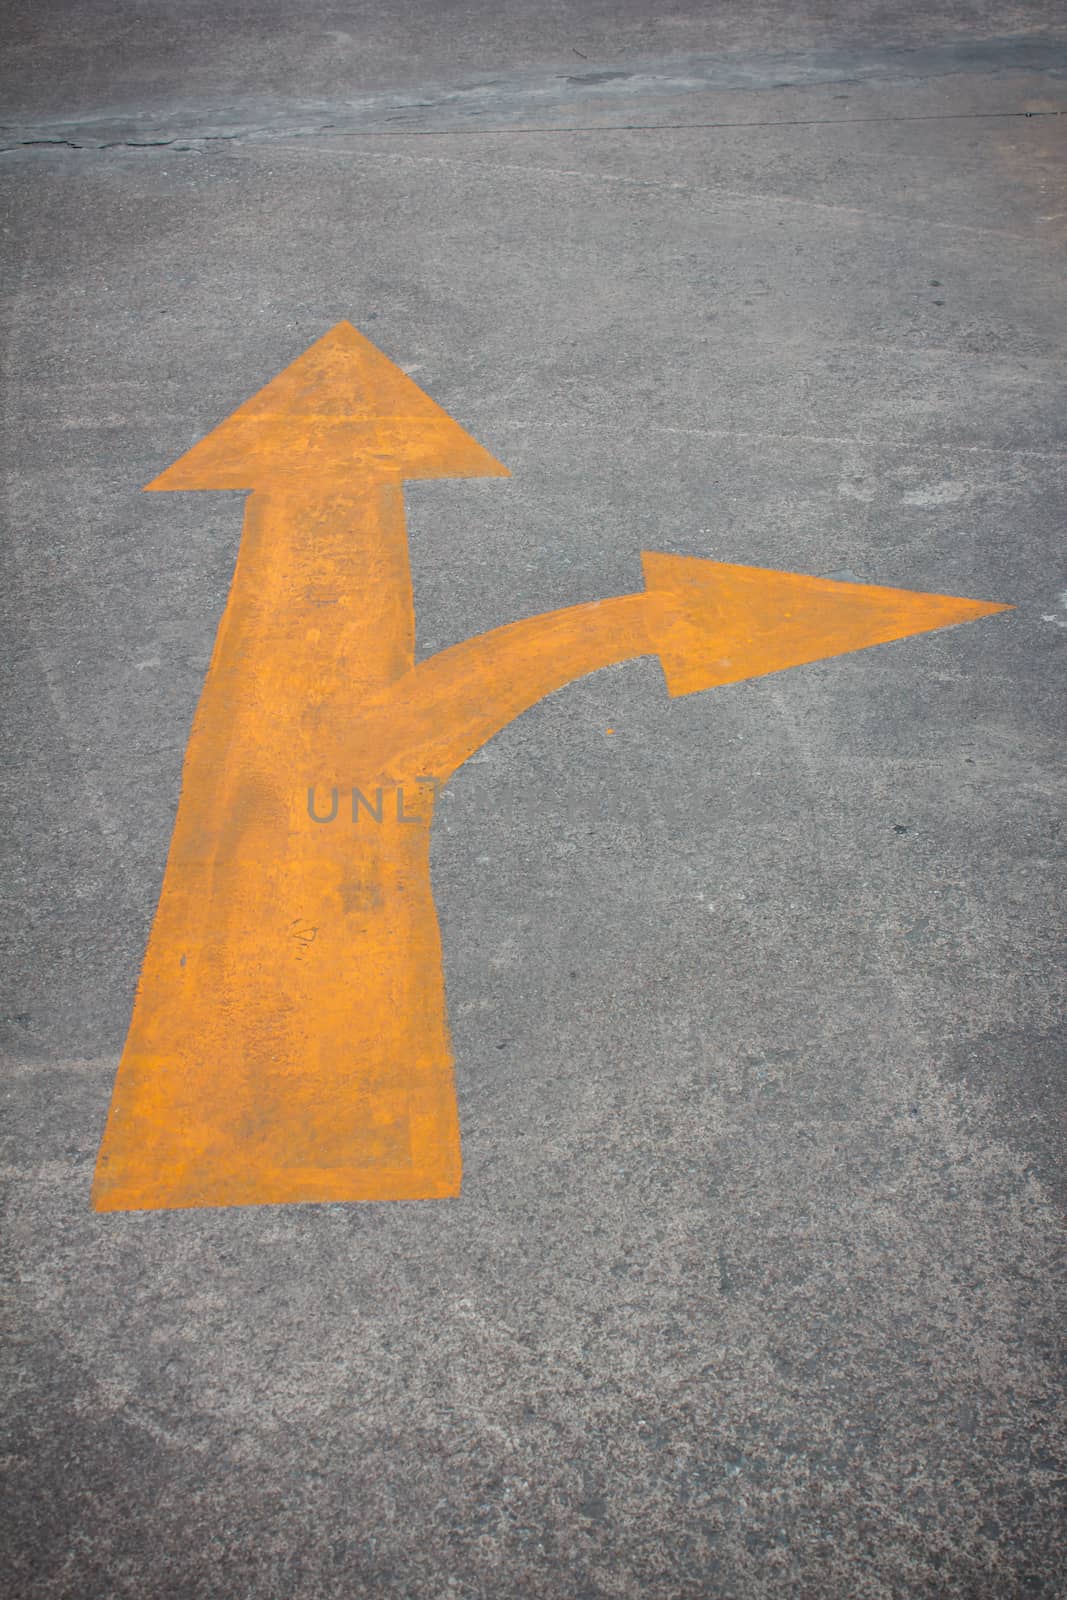 A yellow traffic arrow signage on the road